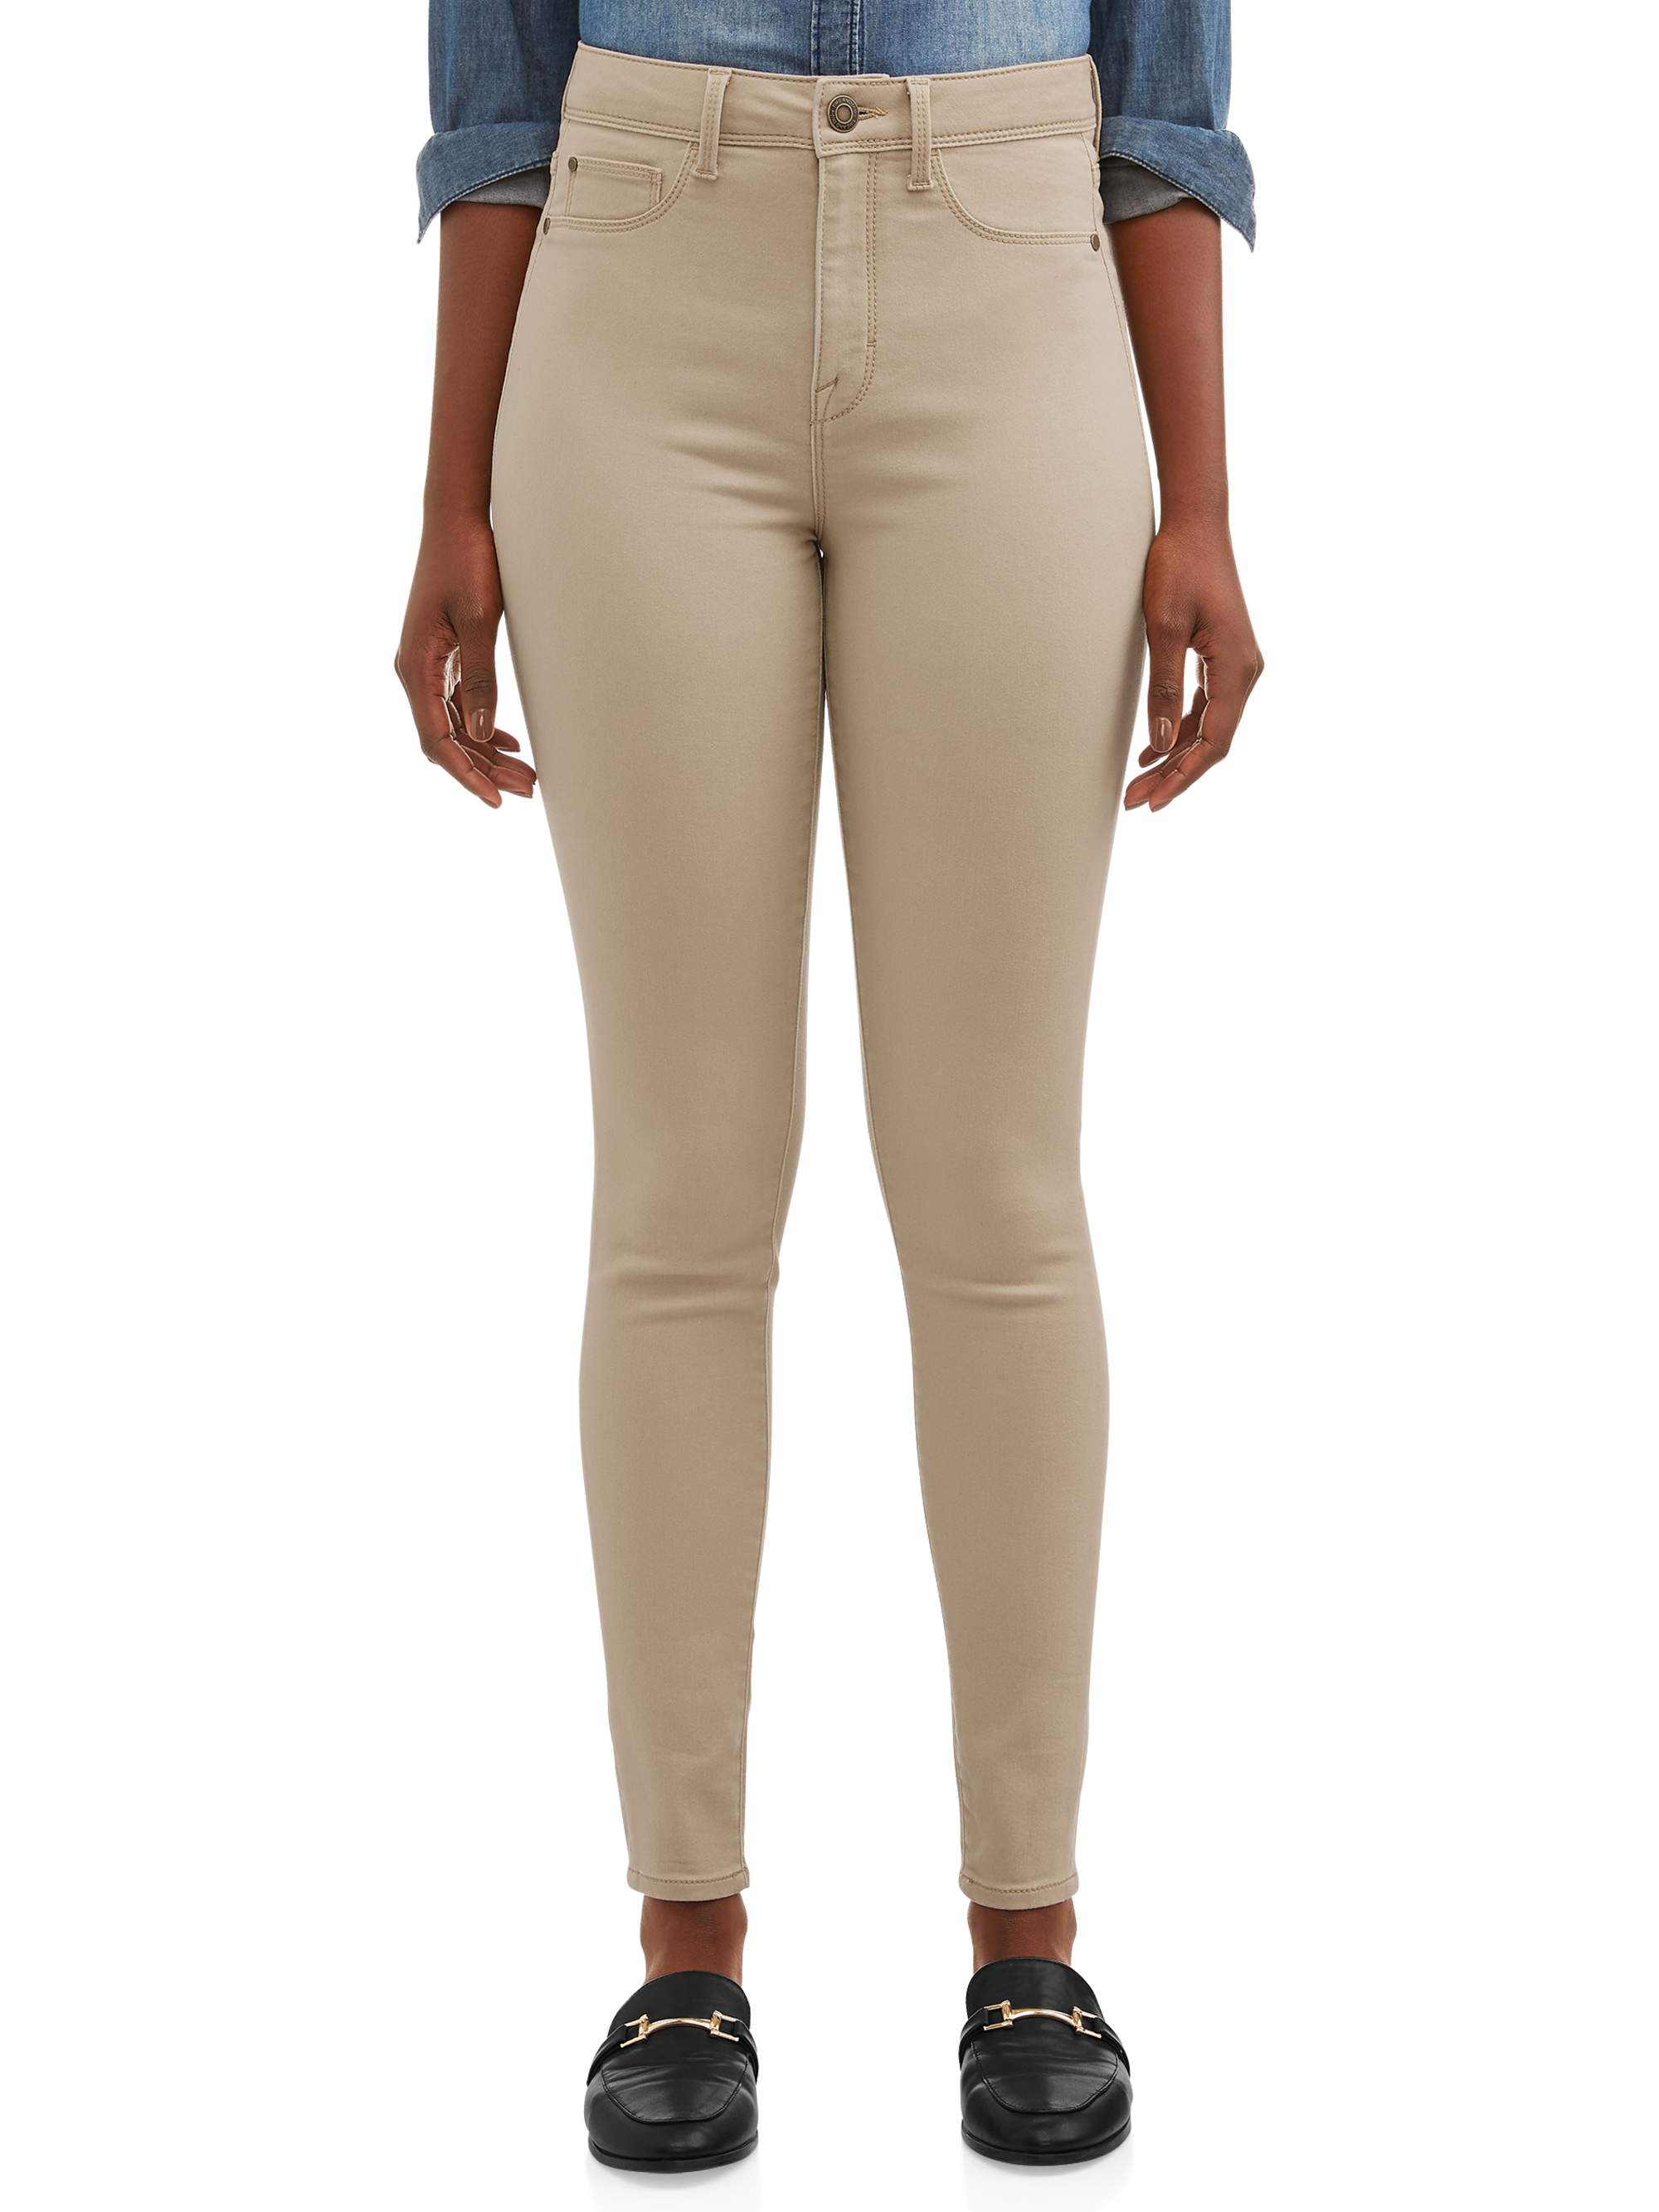 Time and Tru Women's High Rise Sculpted Jeggings - image 1 of 4